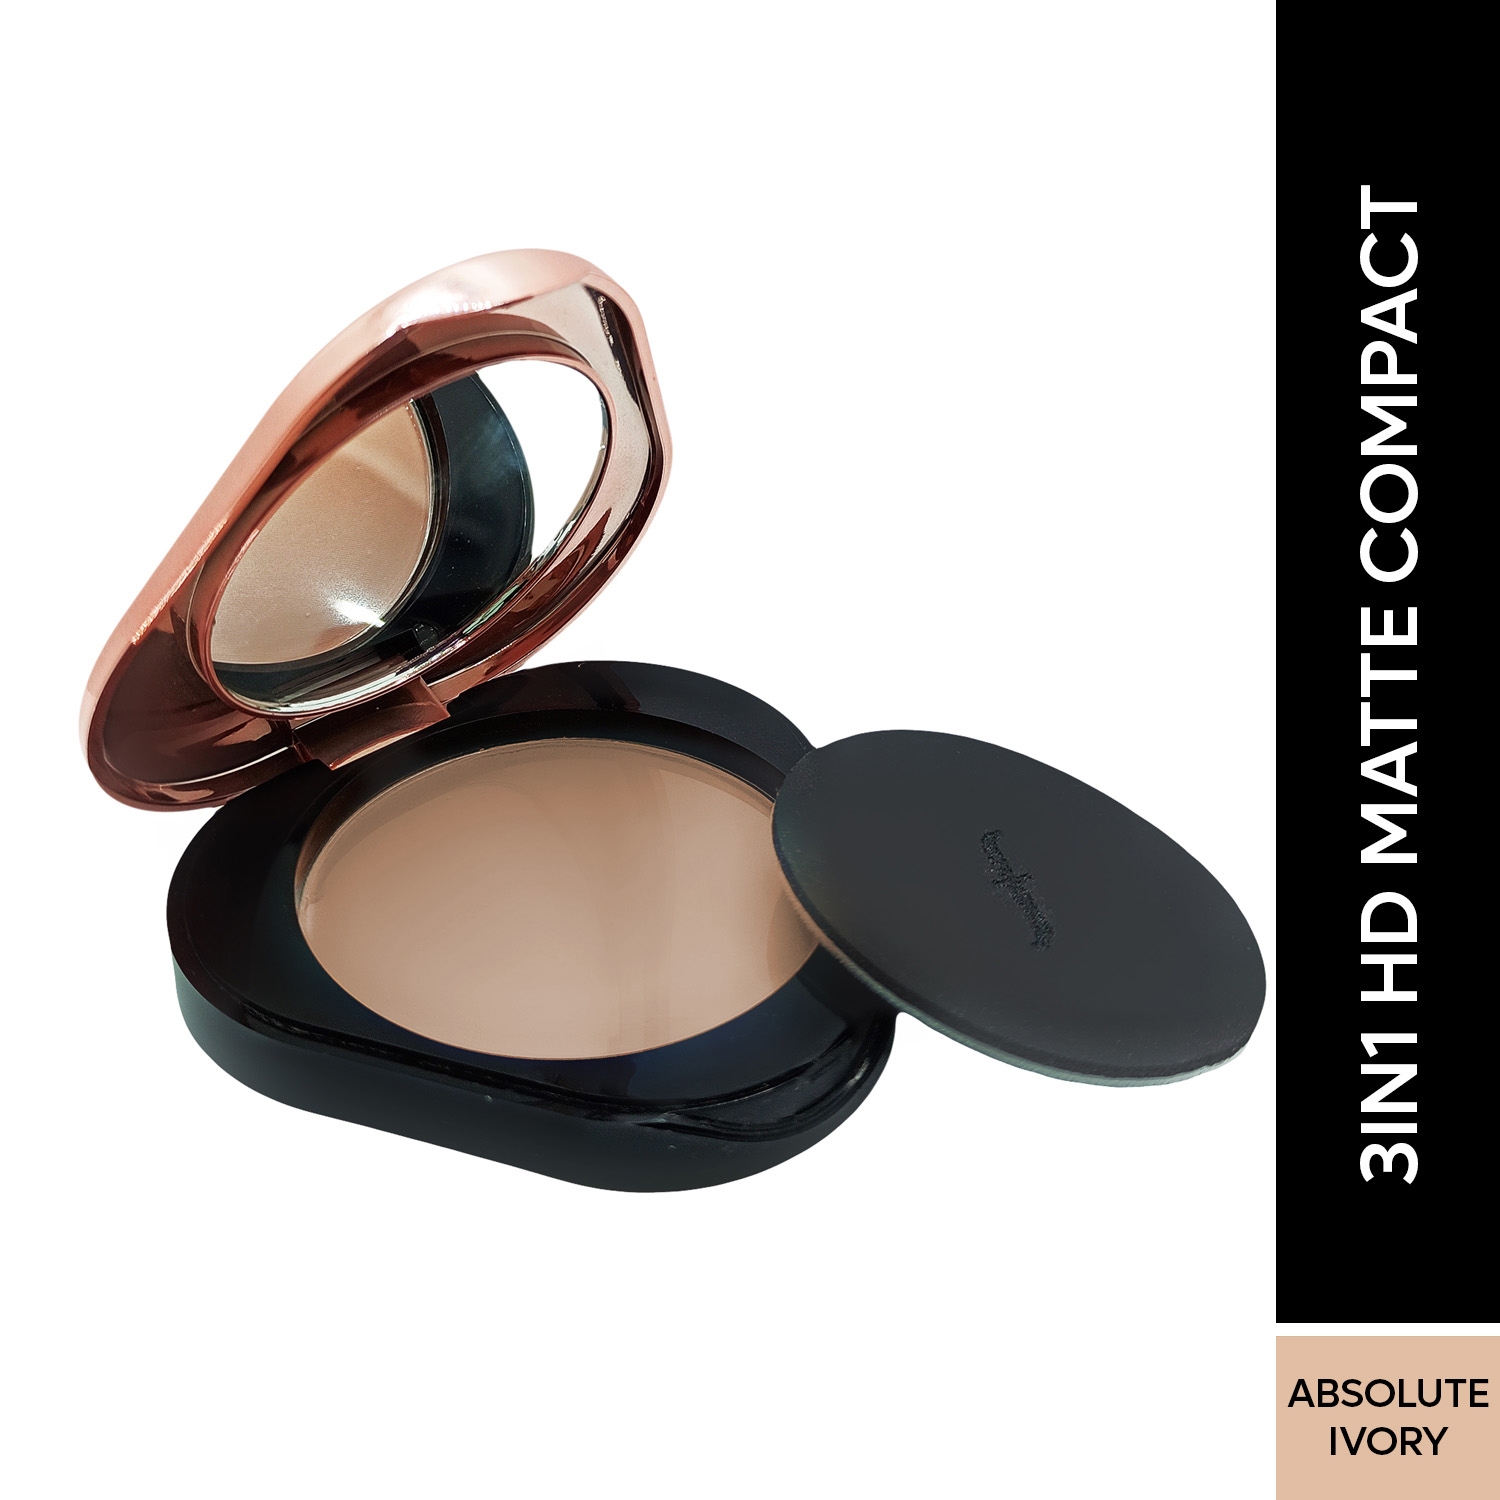 Faces Canada | Faces Canada 3 in 1 HD Matte Compact + Foundation + Hydration - Absolute Ivory 01 (8g)